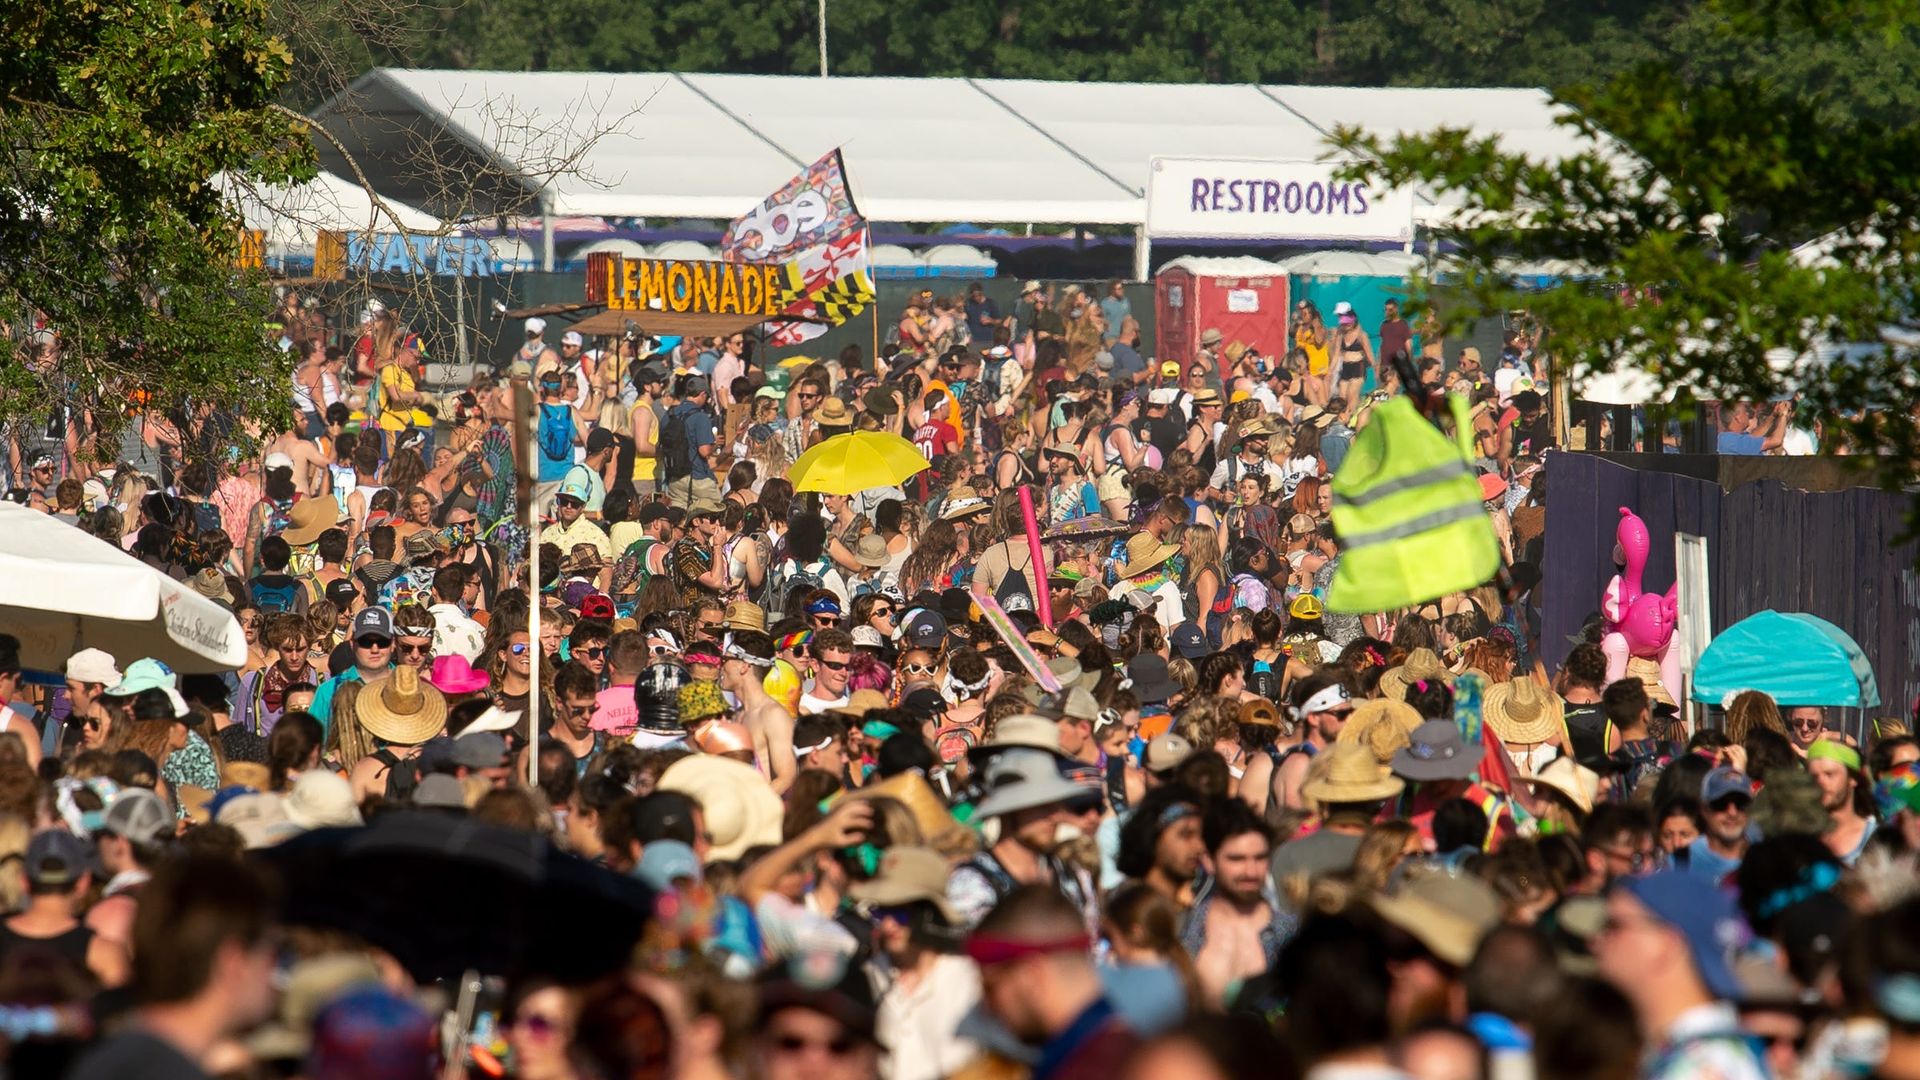 A large crowd of people at Bonnaroo in 2019